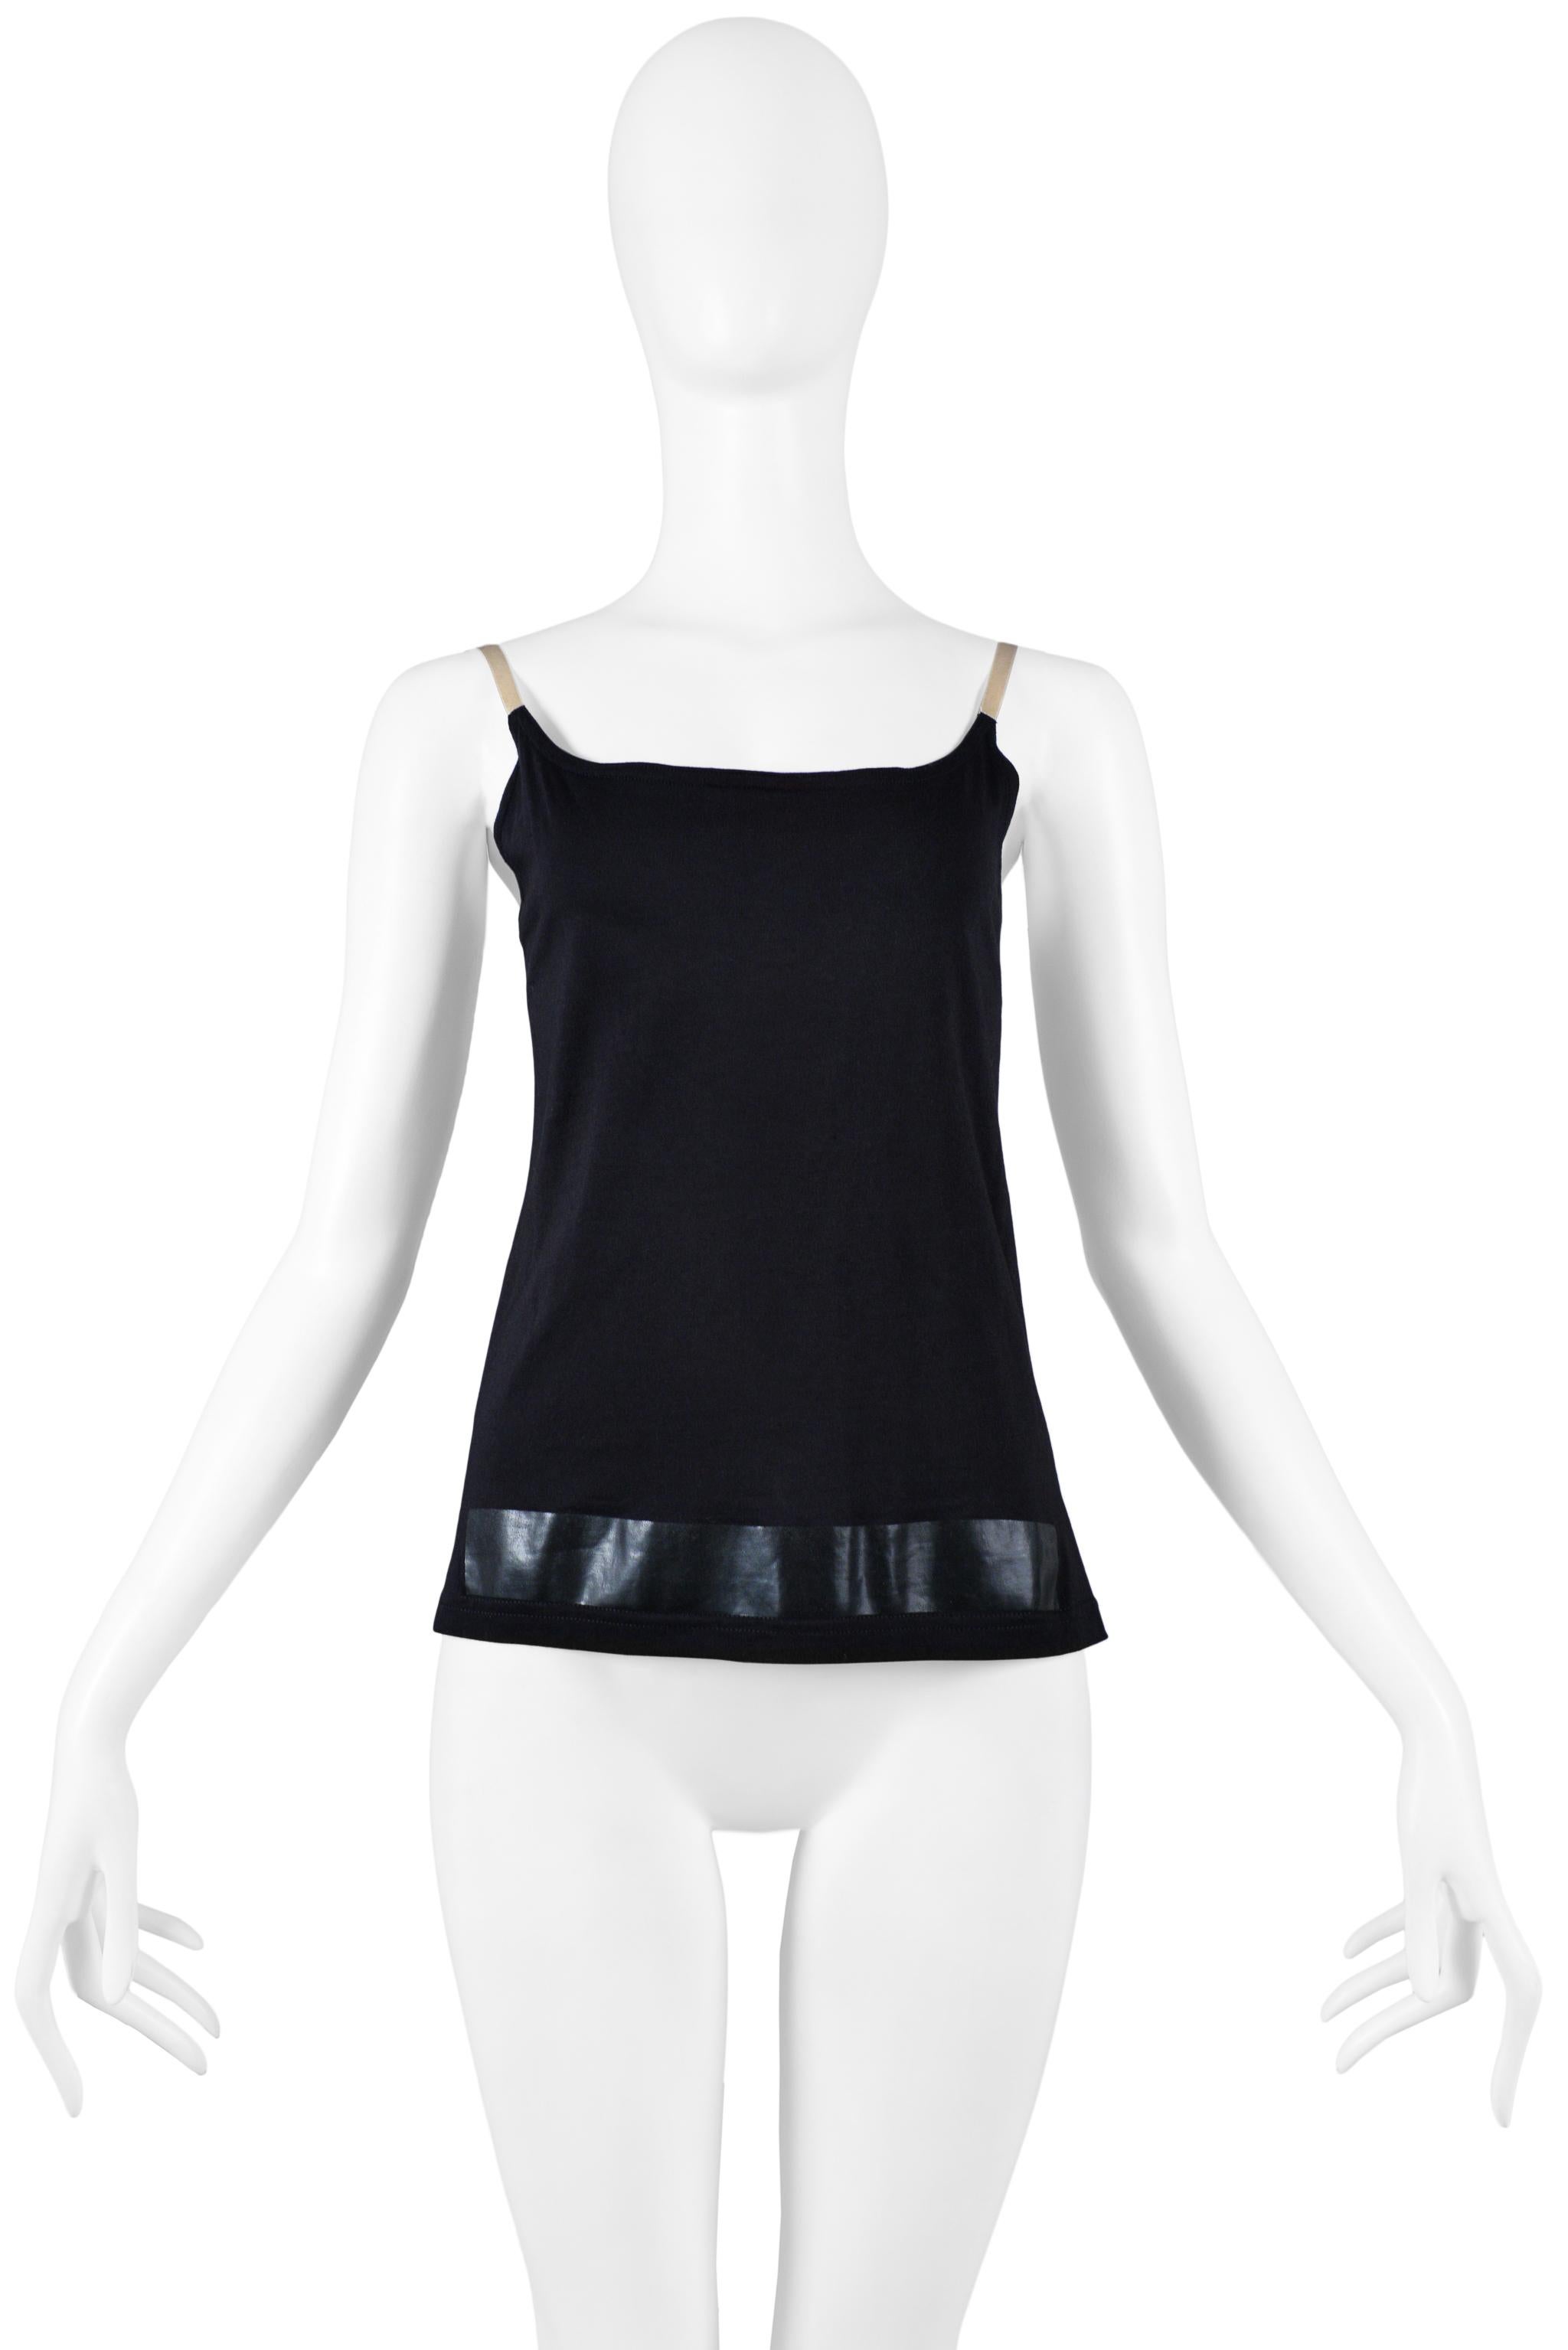 Resurrection Vintage is excited to offer a vintage Helmut Lang black cotton knit tank top featuring a black stripe and nude straps. From the 1996 collection. 

Helmut Lang 
Size M
Cotton Jersey
1996 Collection 
Excellent Vintage Condition